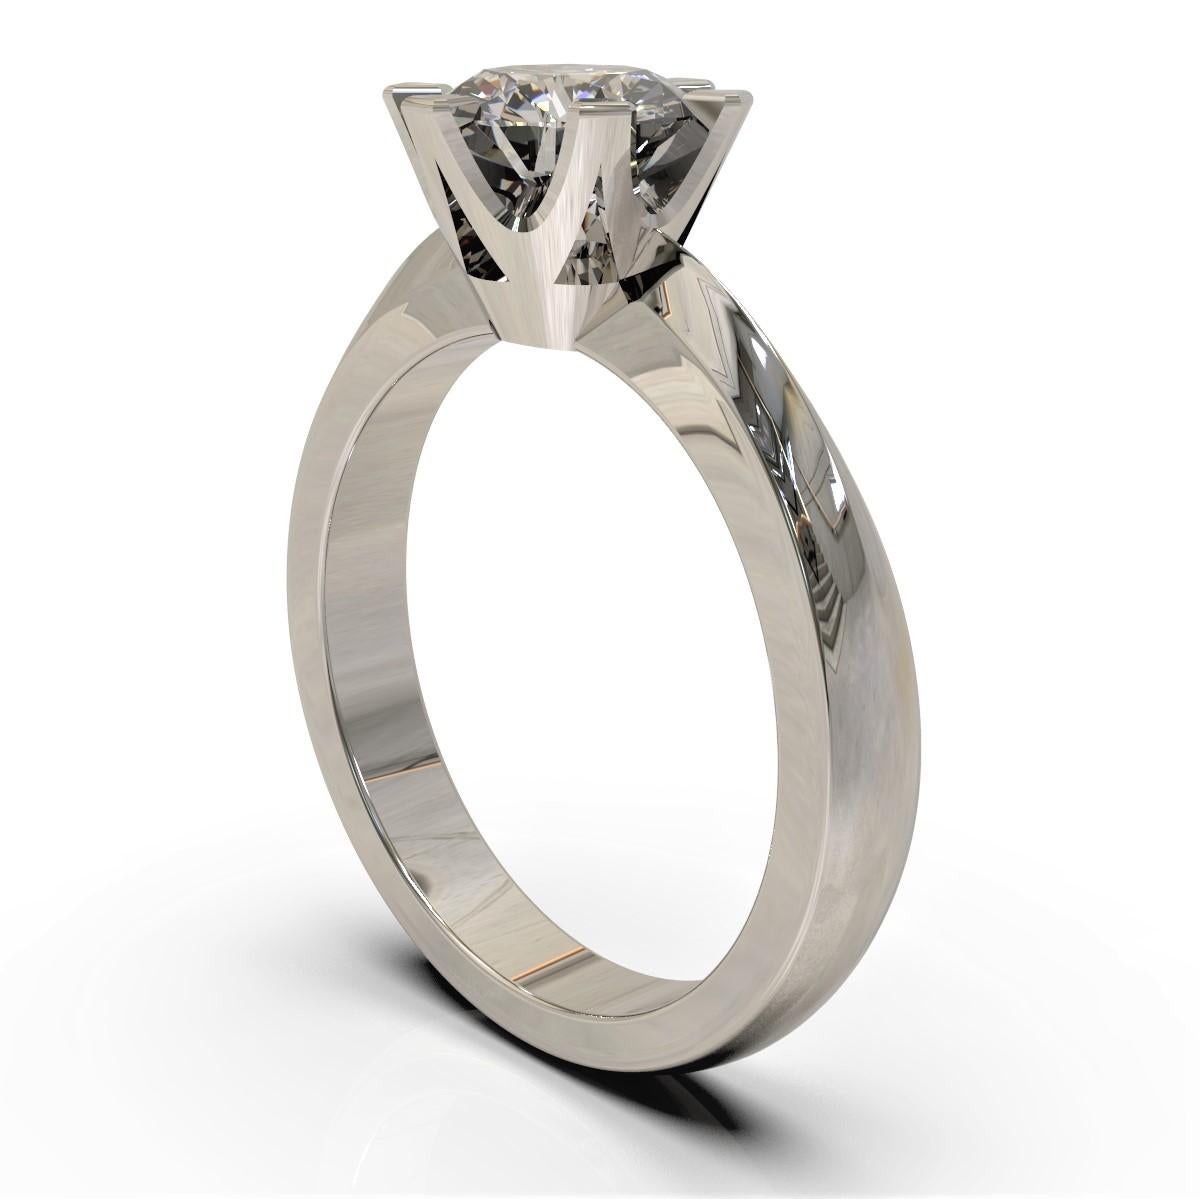 Brilliant Diamante Ring

This eye-catching organic shape platinum engagement ring features a white brilliant cut diamond. 

Round brilliant cut diamond: GIA Certified D colour, SVS2 clarity 1= D colour, VS2 clarity, 5.18 x 5.21 x 3.12mm, 0.5ct